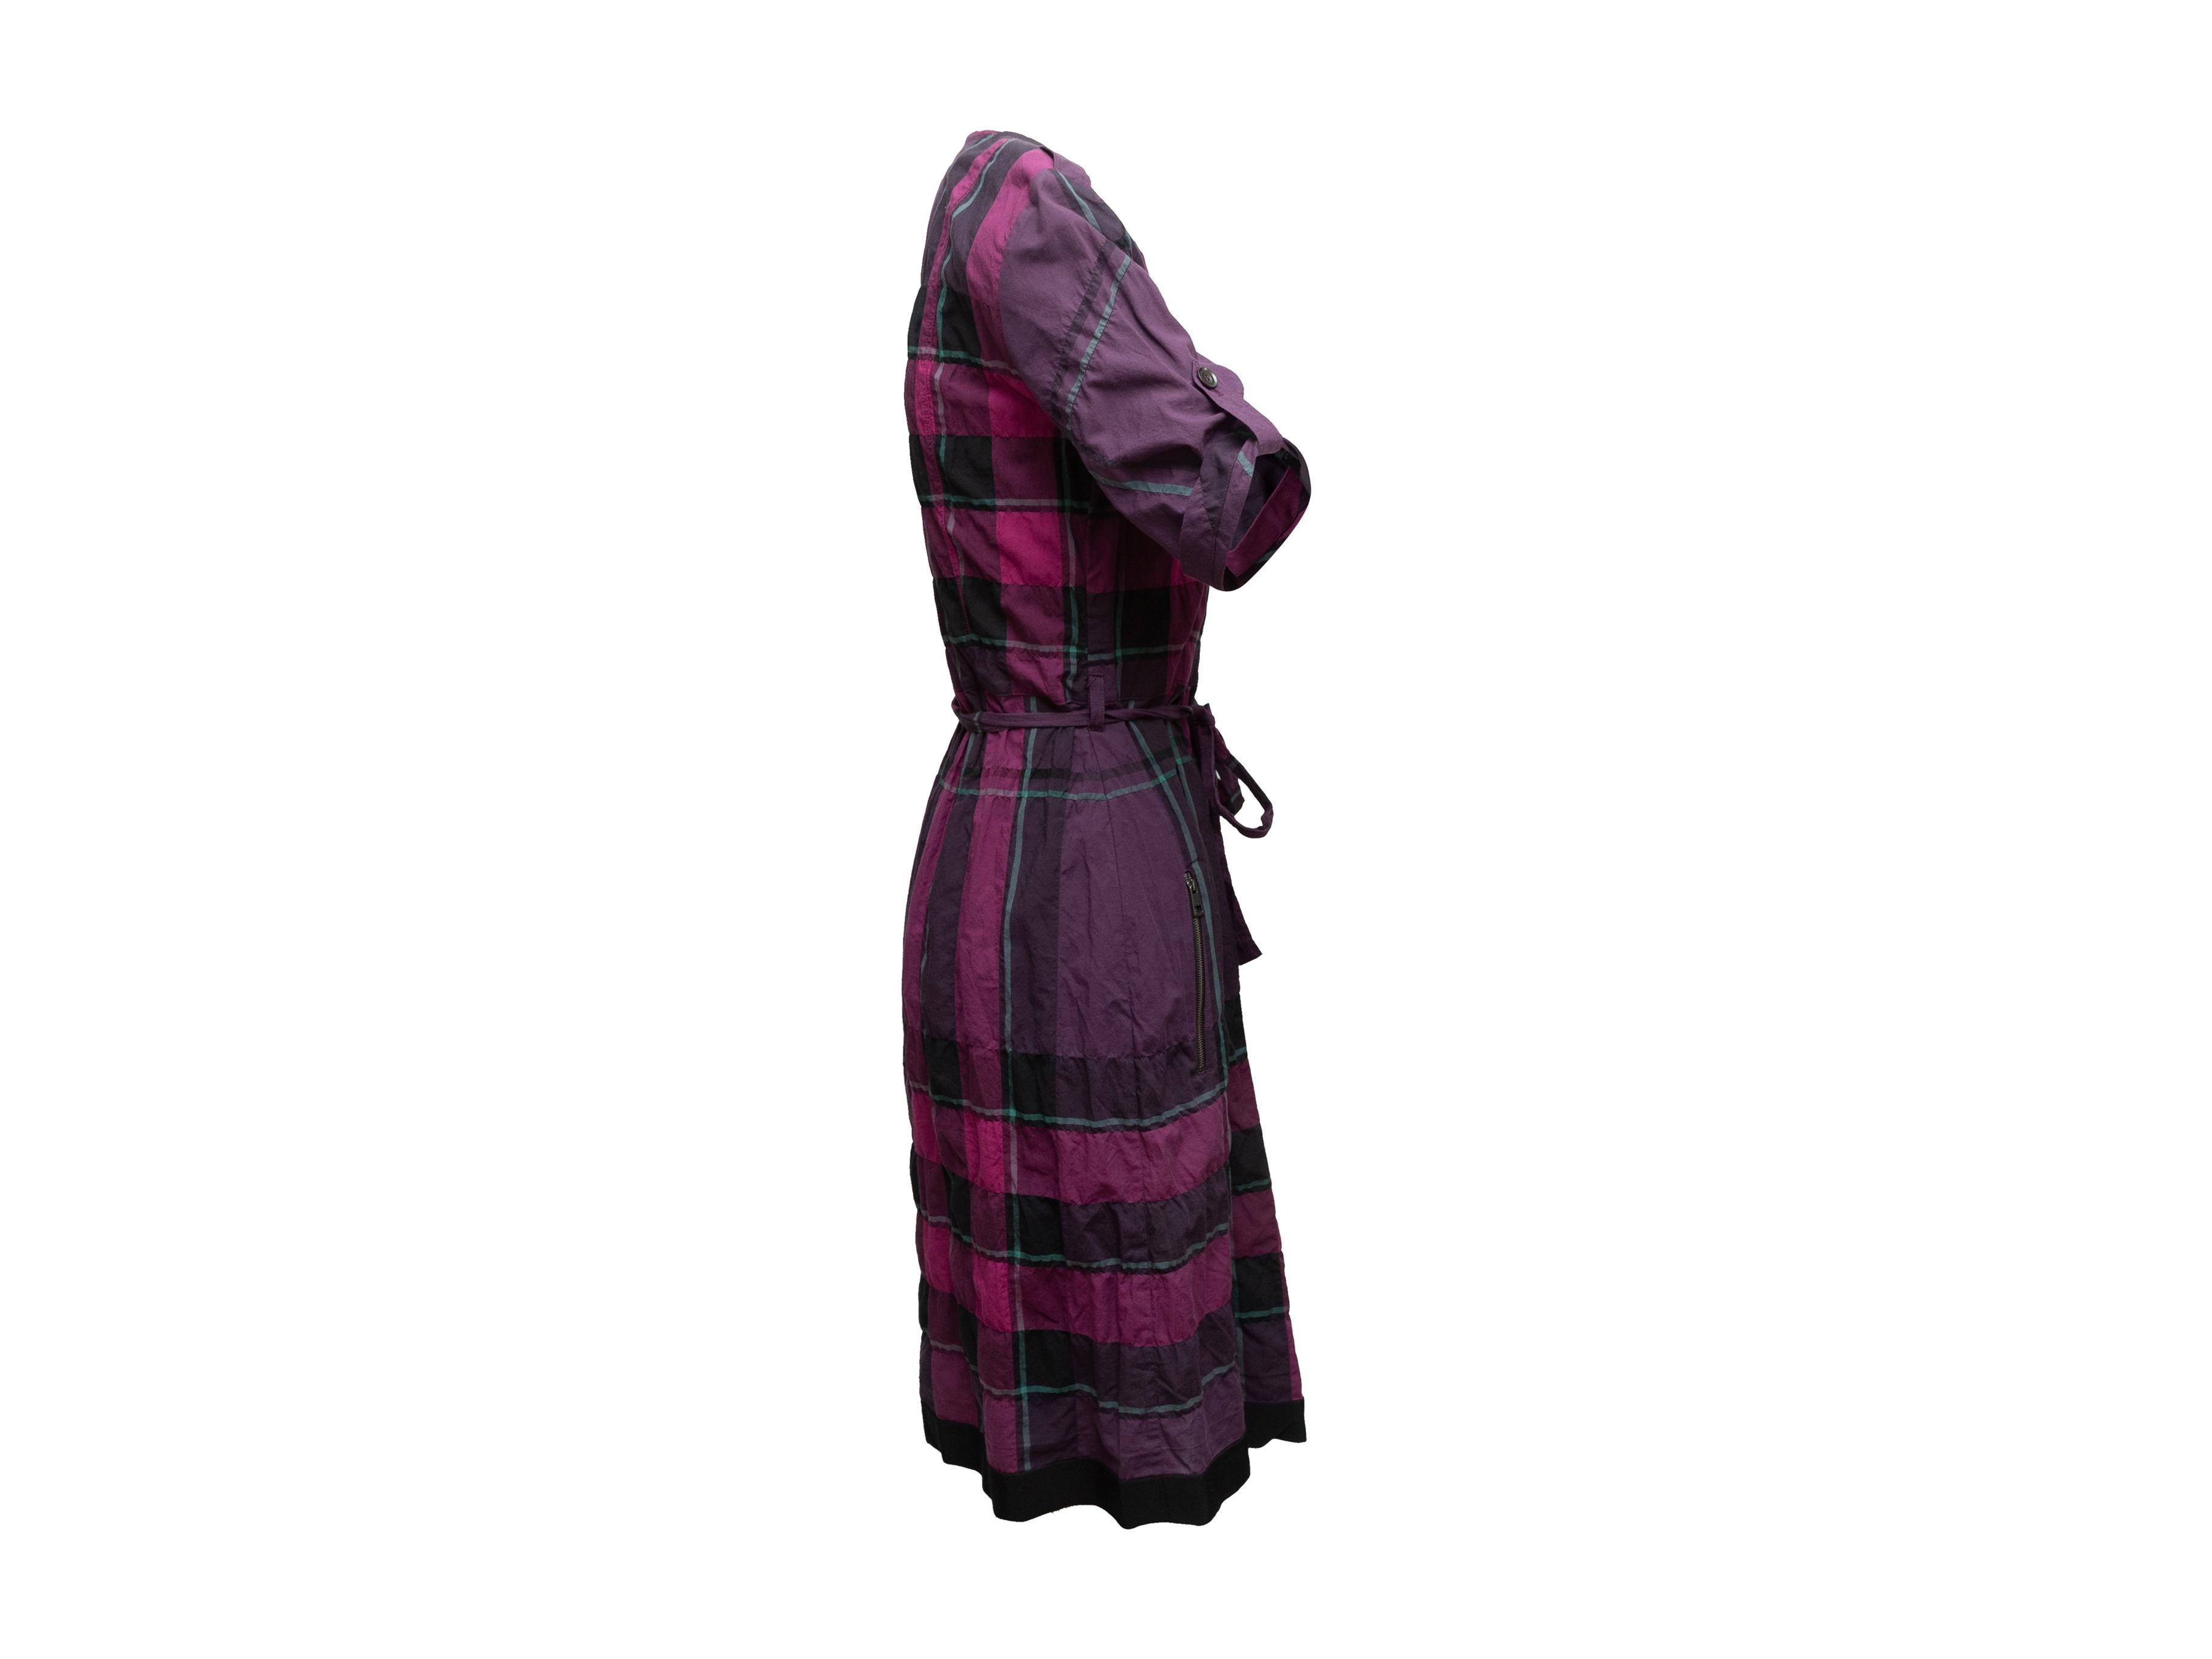 Product details: Purple and multicolor House Check short sleeve dress by Burberry Brit. V-neck. Sash tie at waist. Dual hip pockets. Zip closure at center front. 34